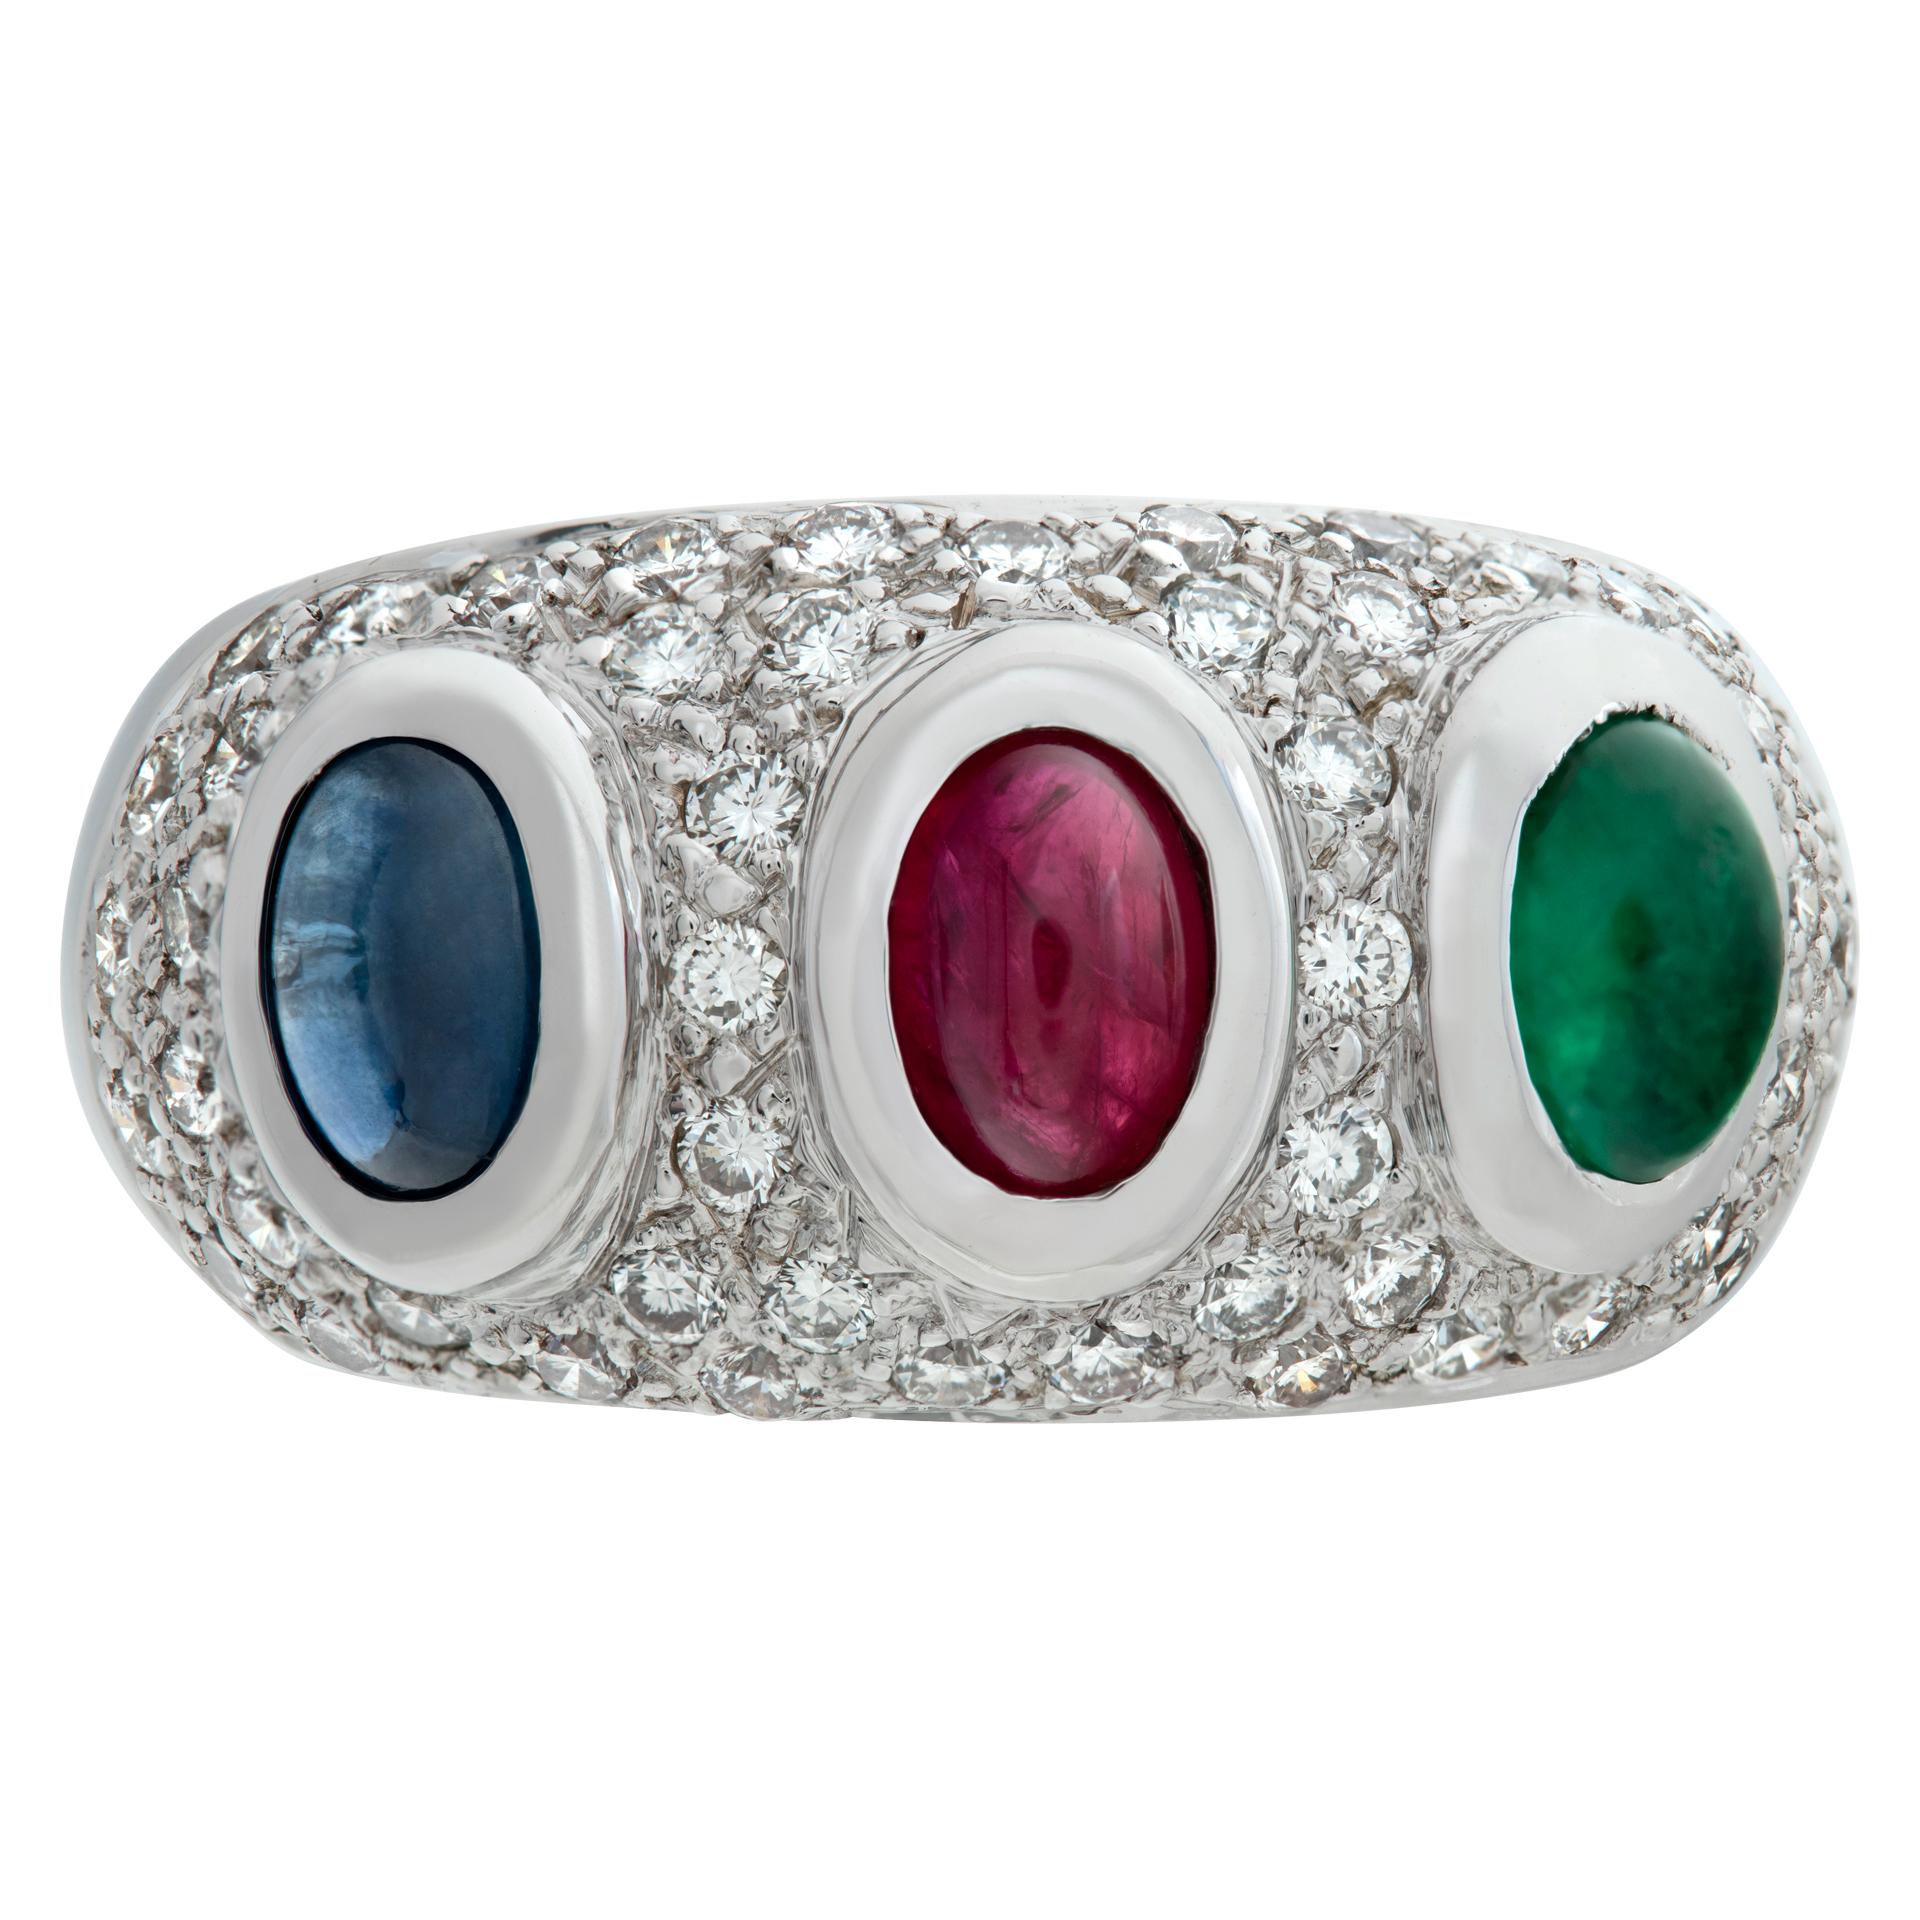 Pave diamond ring with cabochon sapphire, ruby & emerald in 18k white gold with approximately 1 carat in pave diamonds (G-I Color, SI Clarity). Size 6.25, width 5mm - 11mm.This Diamond ring is currently size 6.25 and some items can be sized up or